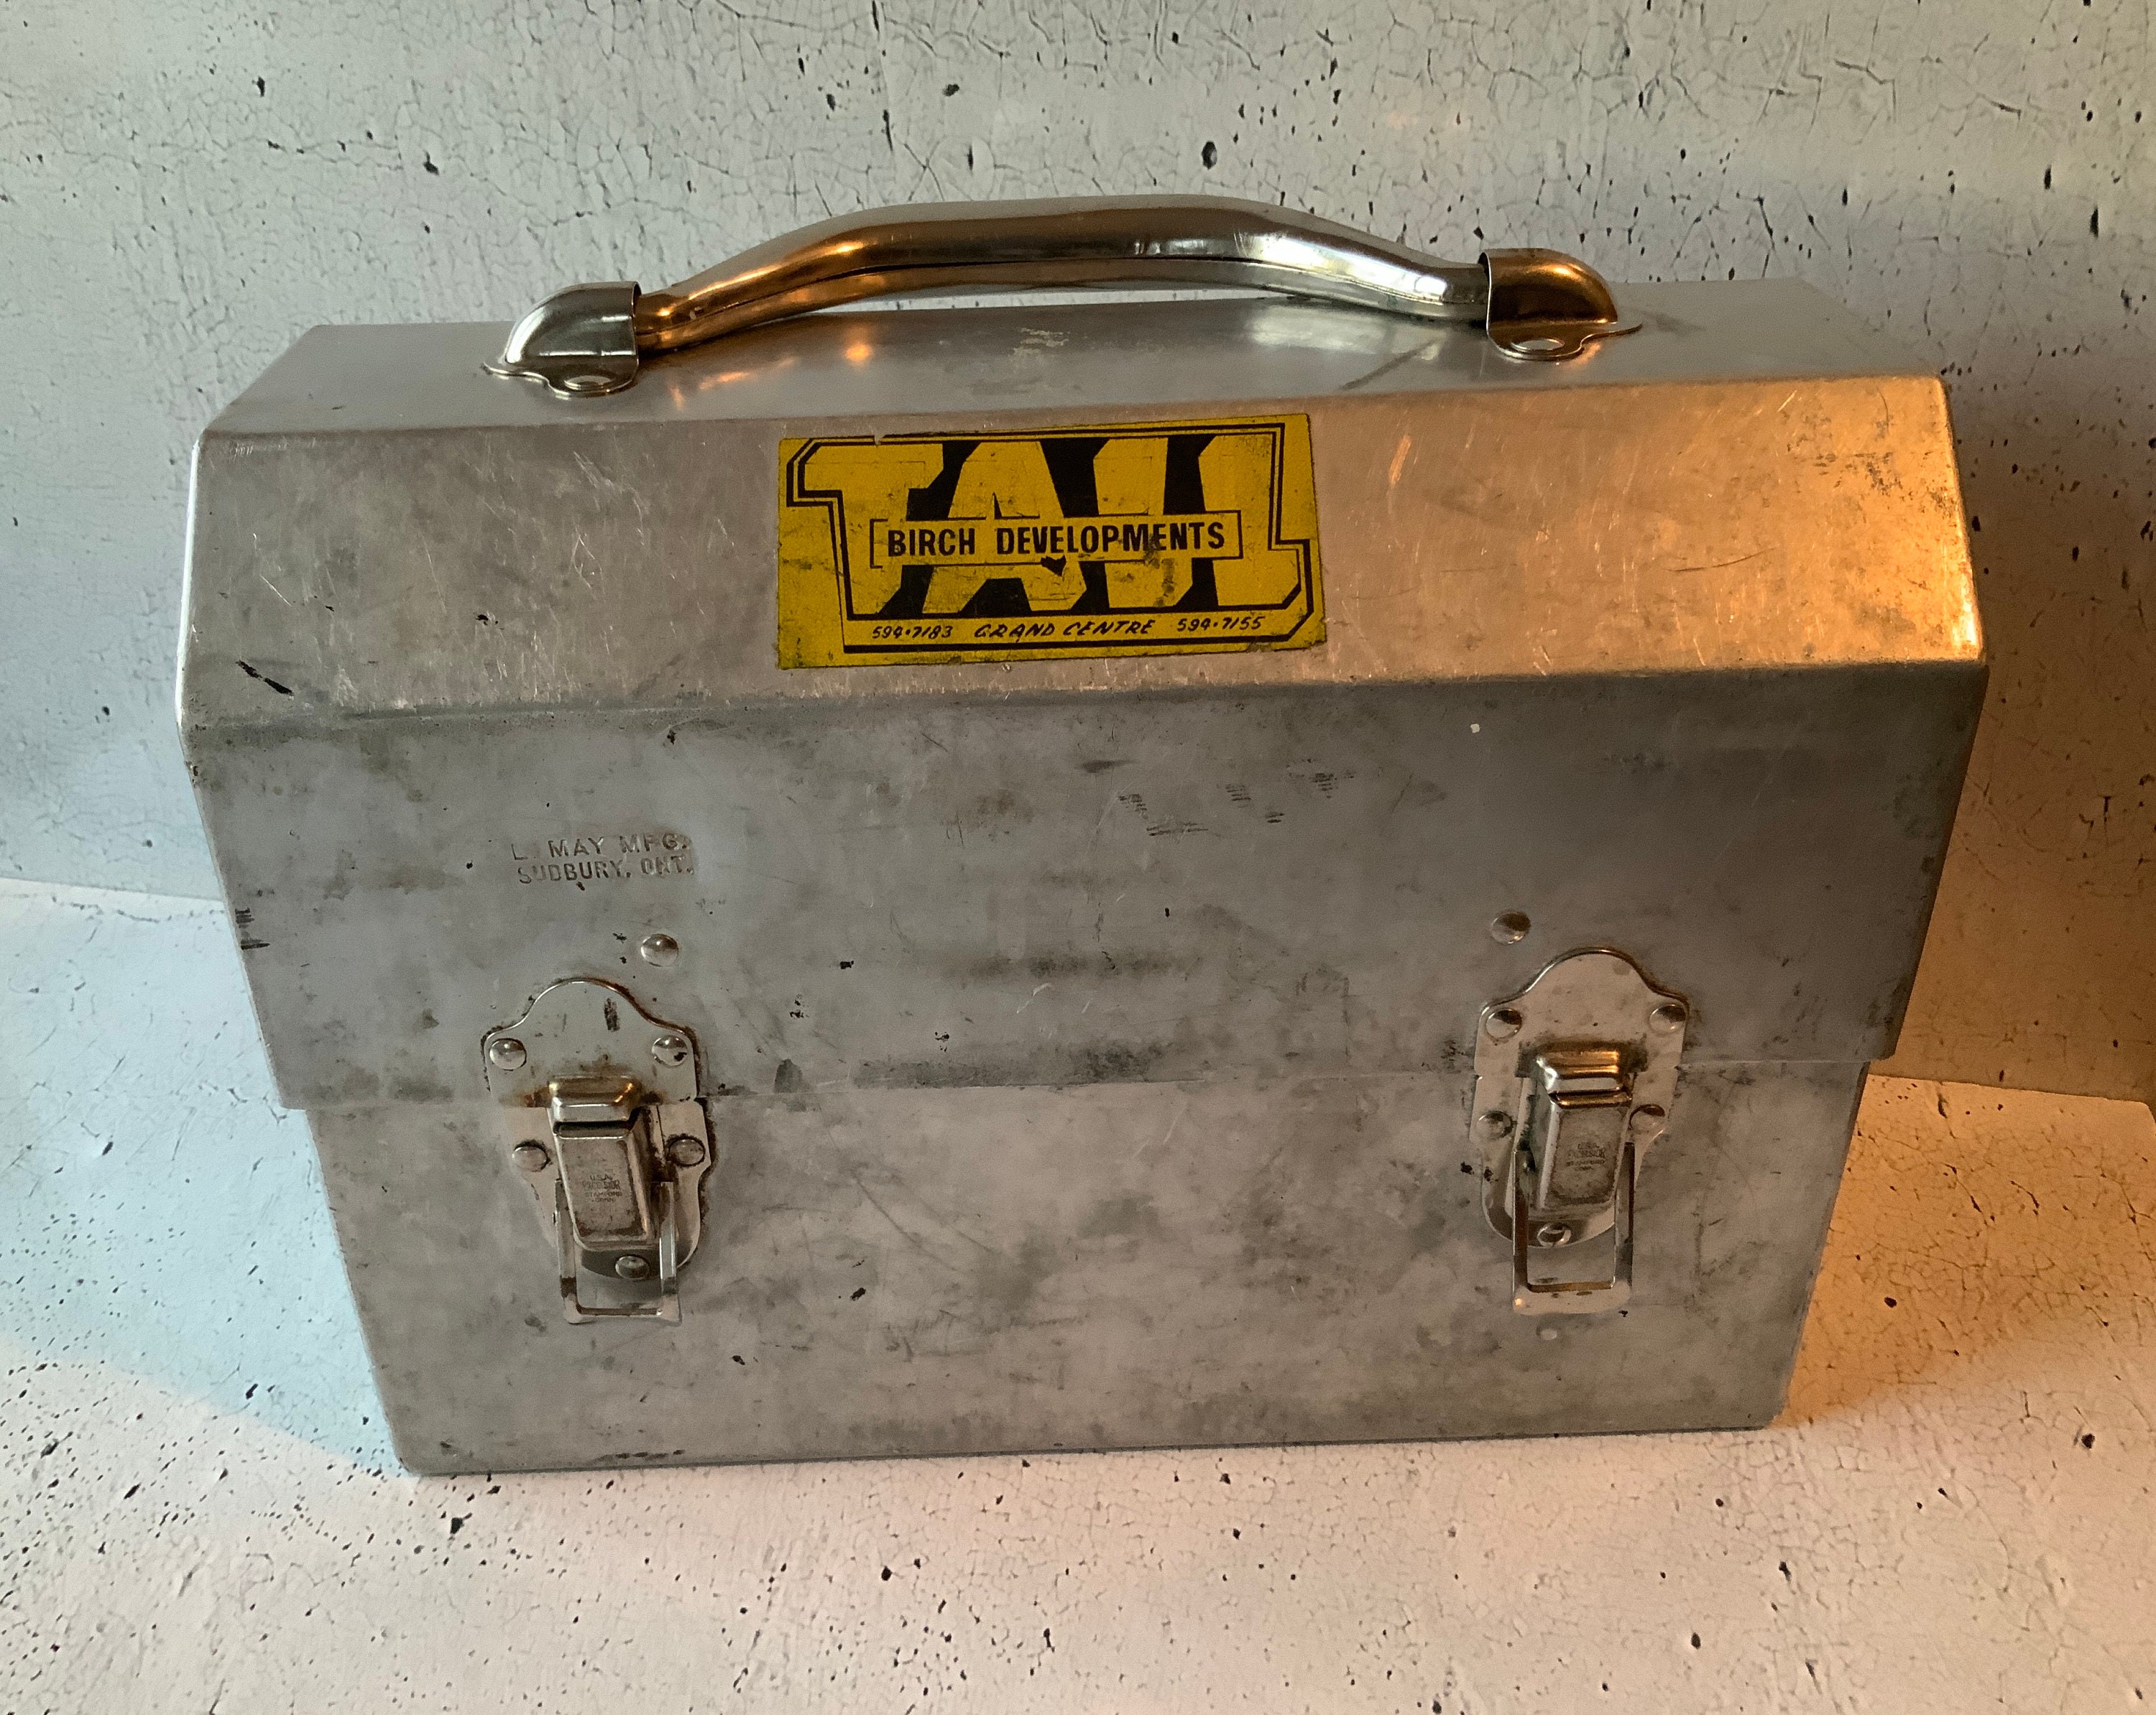 Miners Lunch Box, L. May MFG, Made in Sudbury